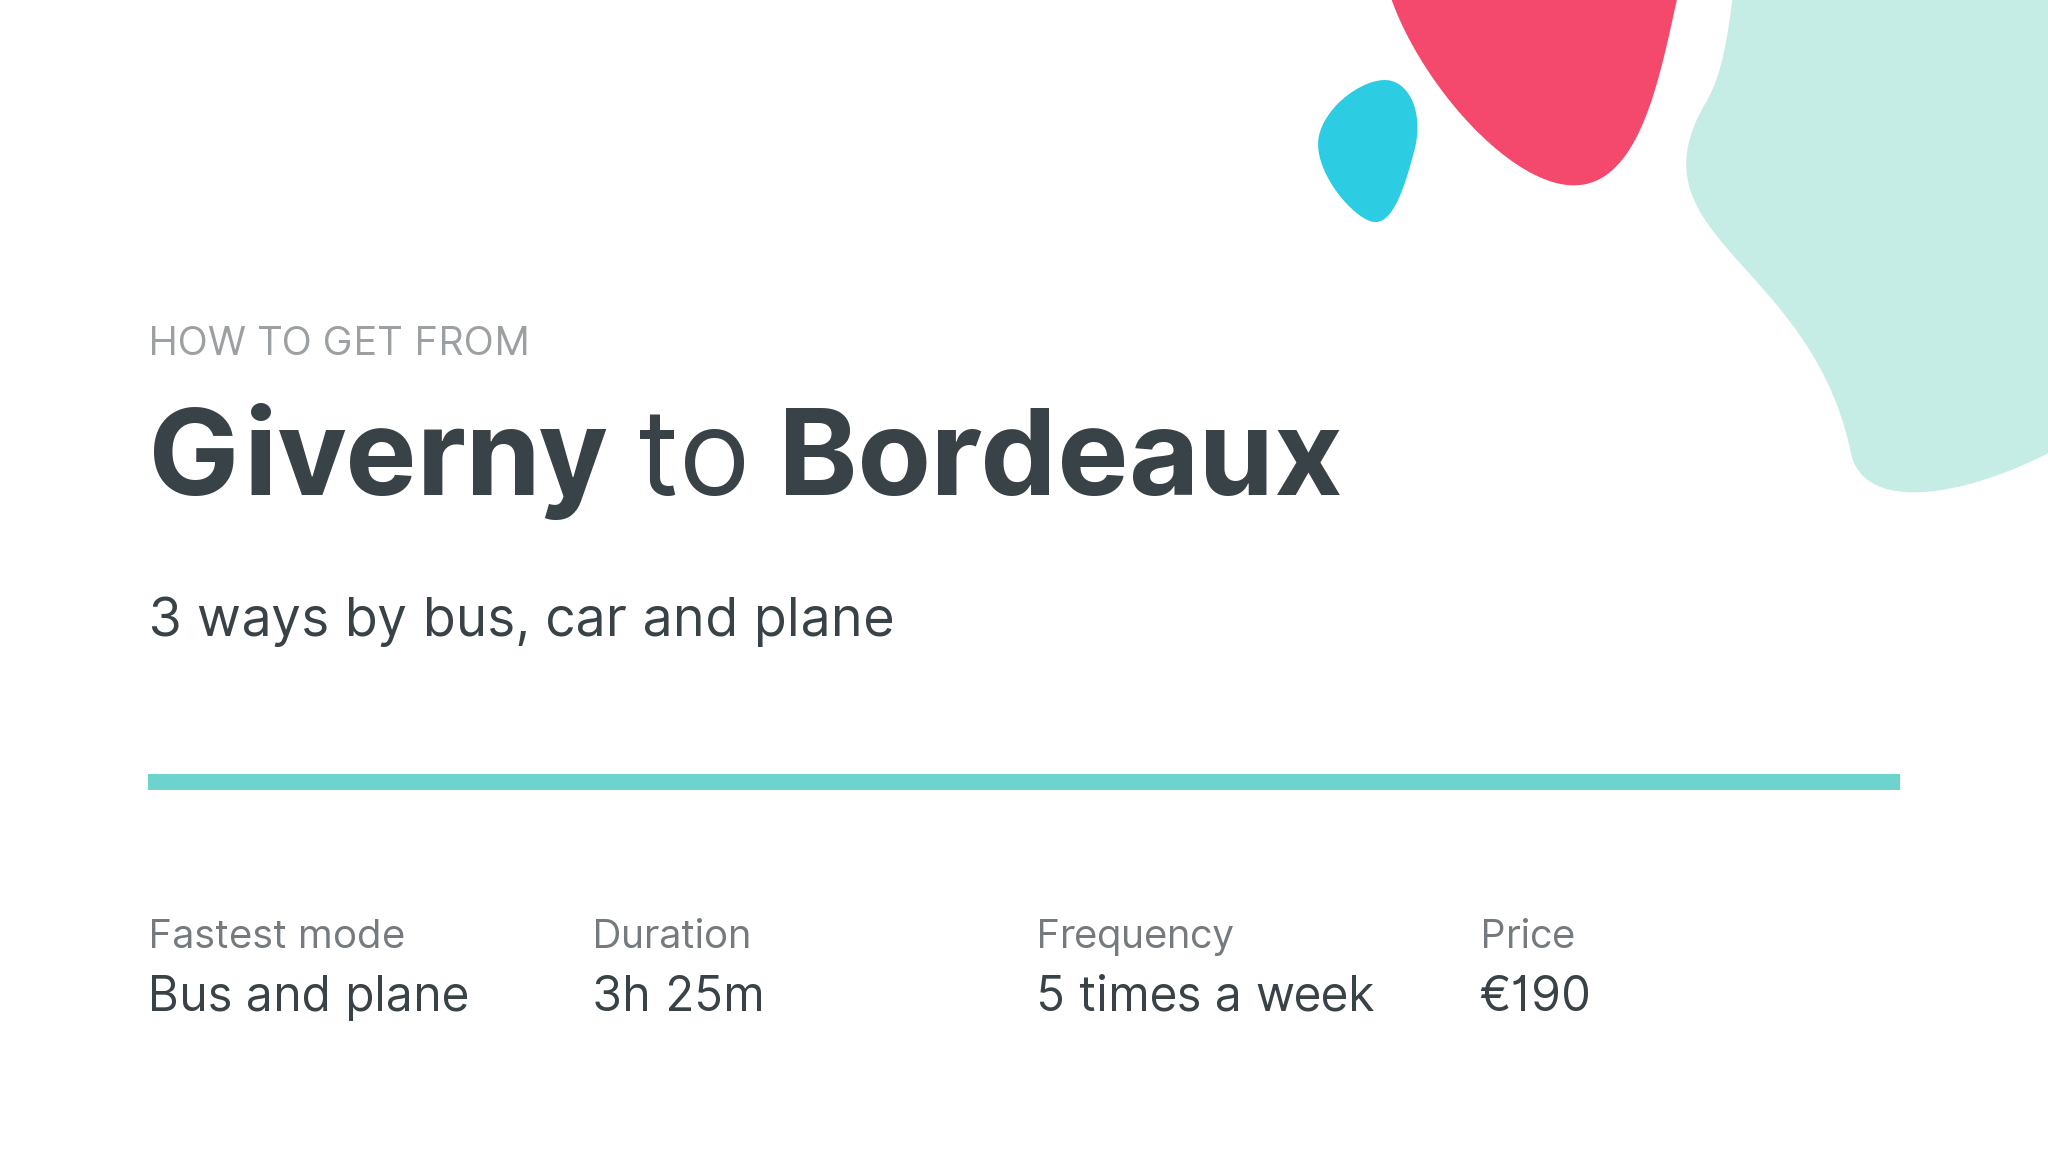 How do I get from Giverny to Bordeaux